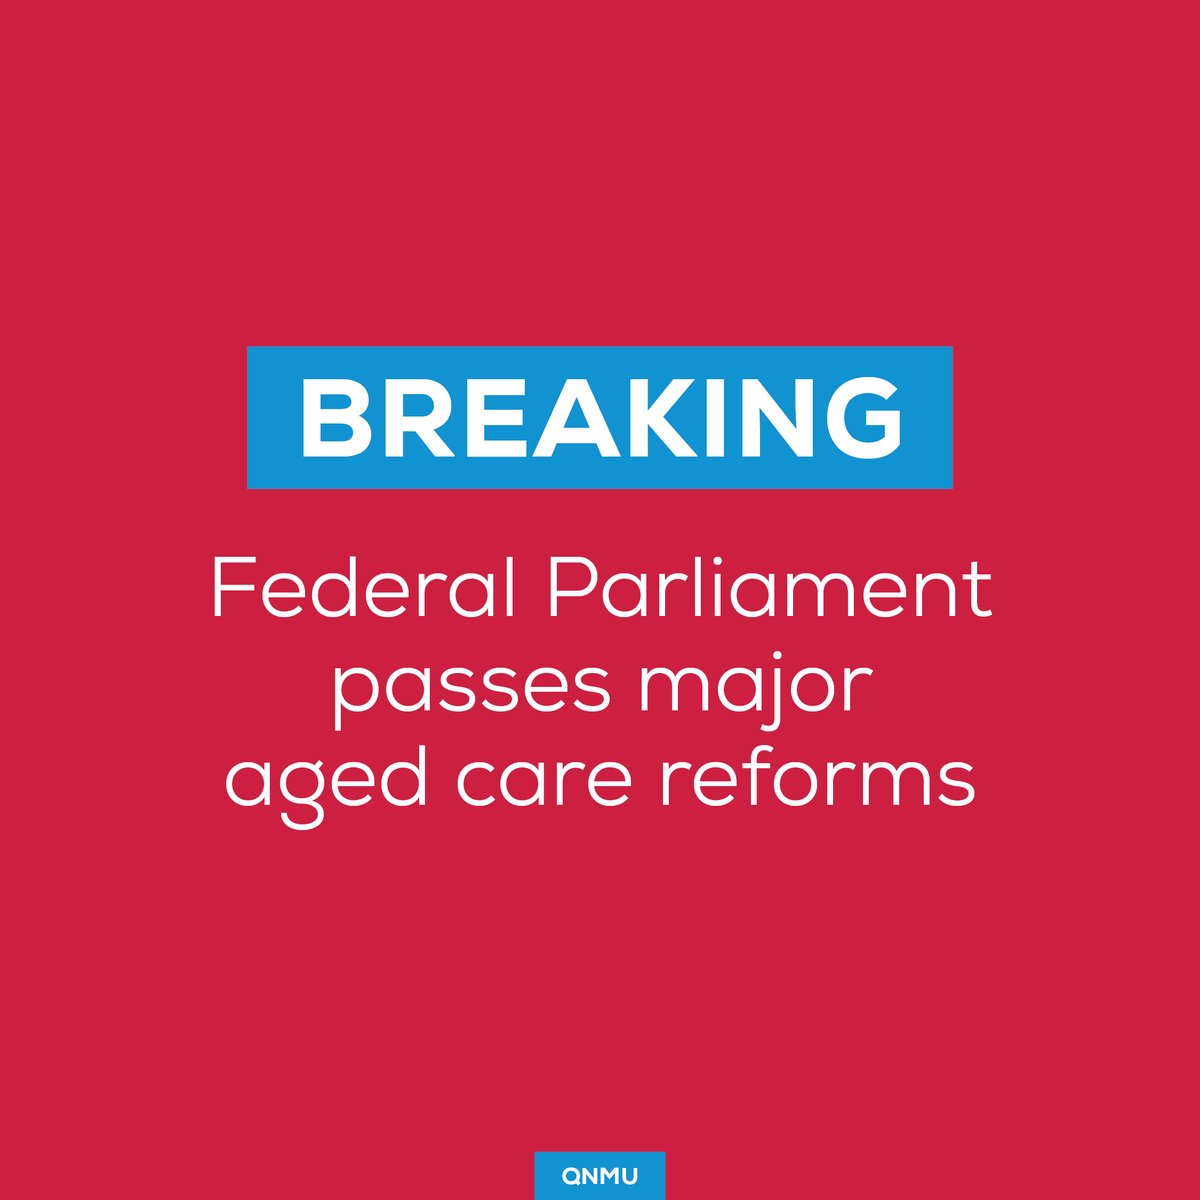 The Implementing Care Bill has passed the Senate, and will now go on to become law. The bill legislates for: Minimum care minutes A Registered Nurse 24/7 Financial transparency and accountability Thank you to all QNMU Activists who have tirelessly campaigned on this issue!